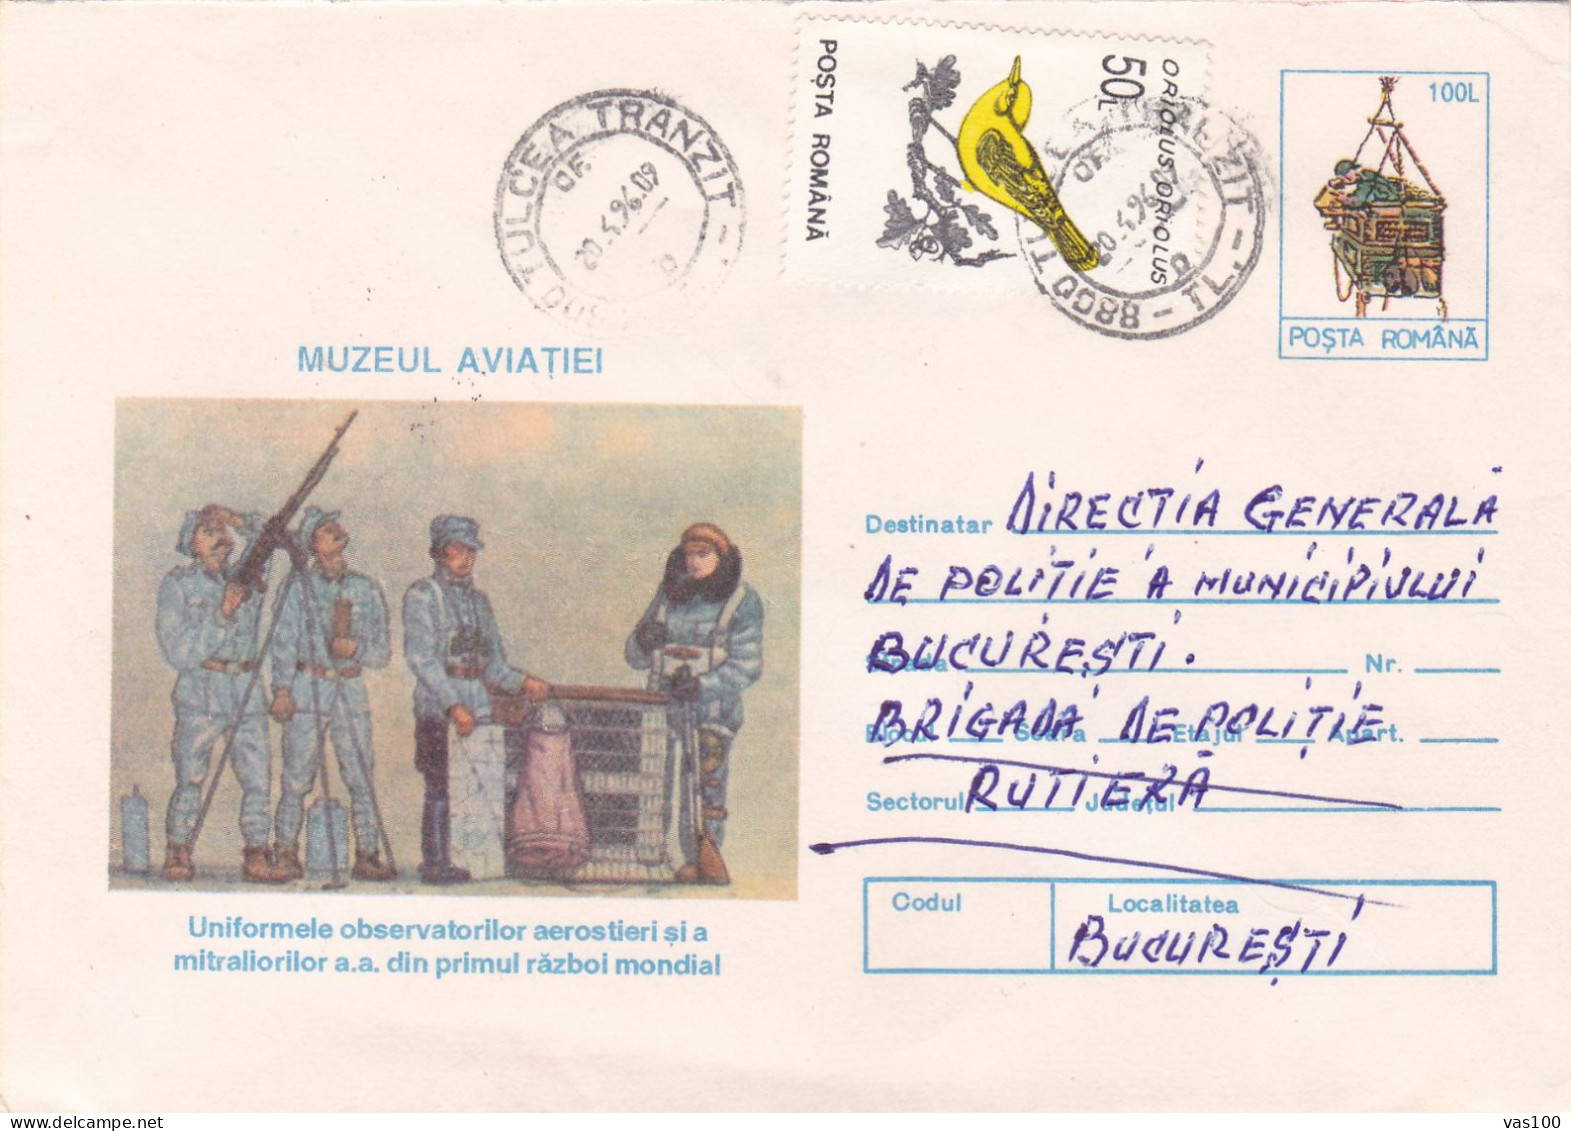 MILITARY UNIFORMS ,AVIATION MUSEUM  COVER STATIONERY 1996, ROMANIA - Museums